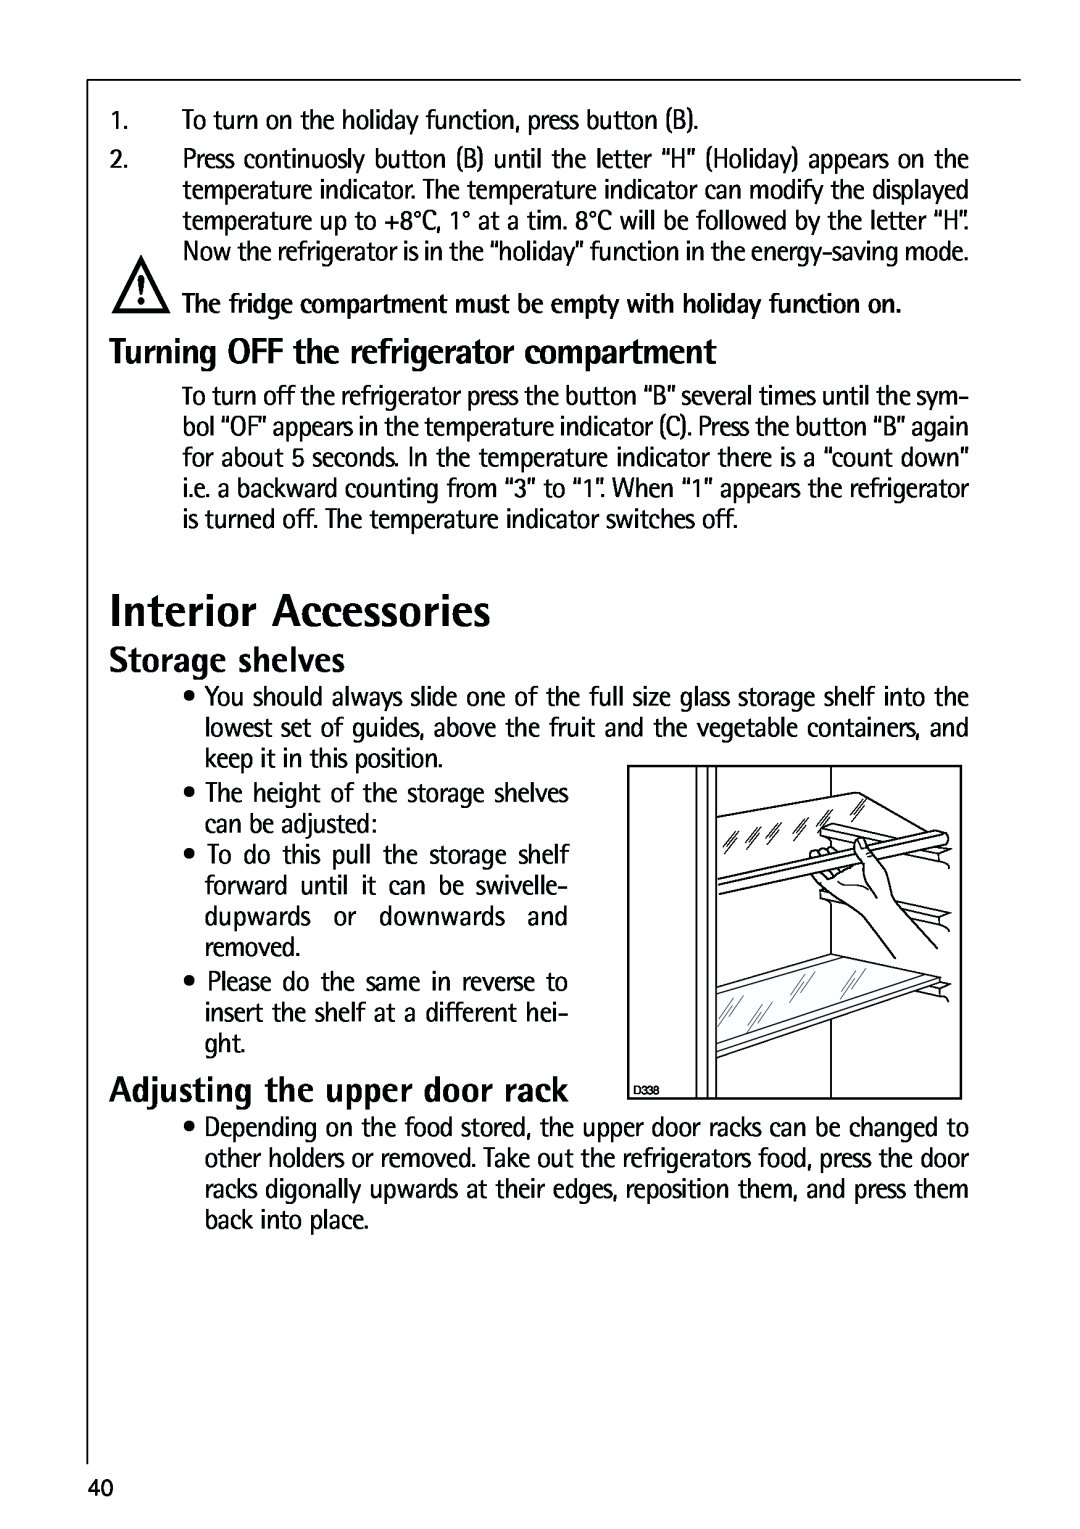 AEG 80318-5 KG user manual Interior Accessories, Turning OFF the refrigerator compartment, Storage shelves 